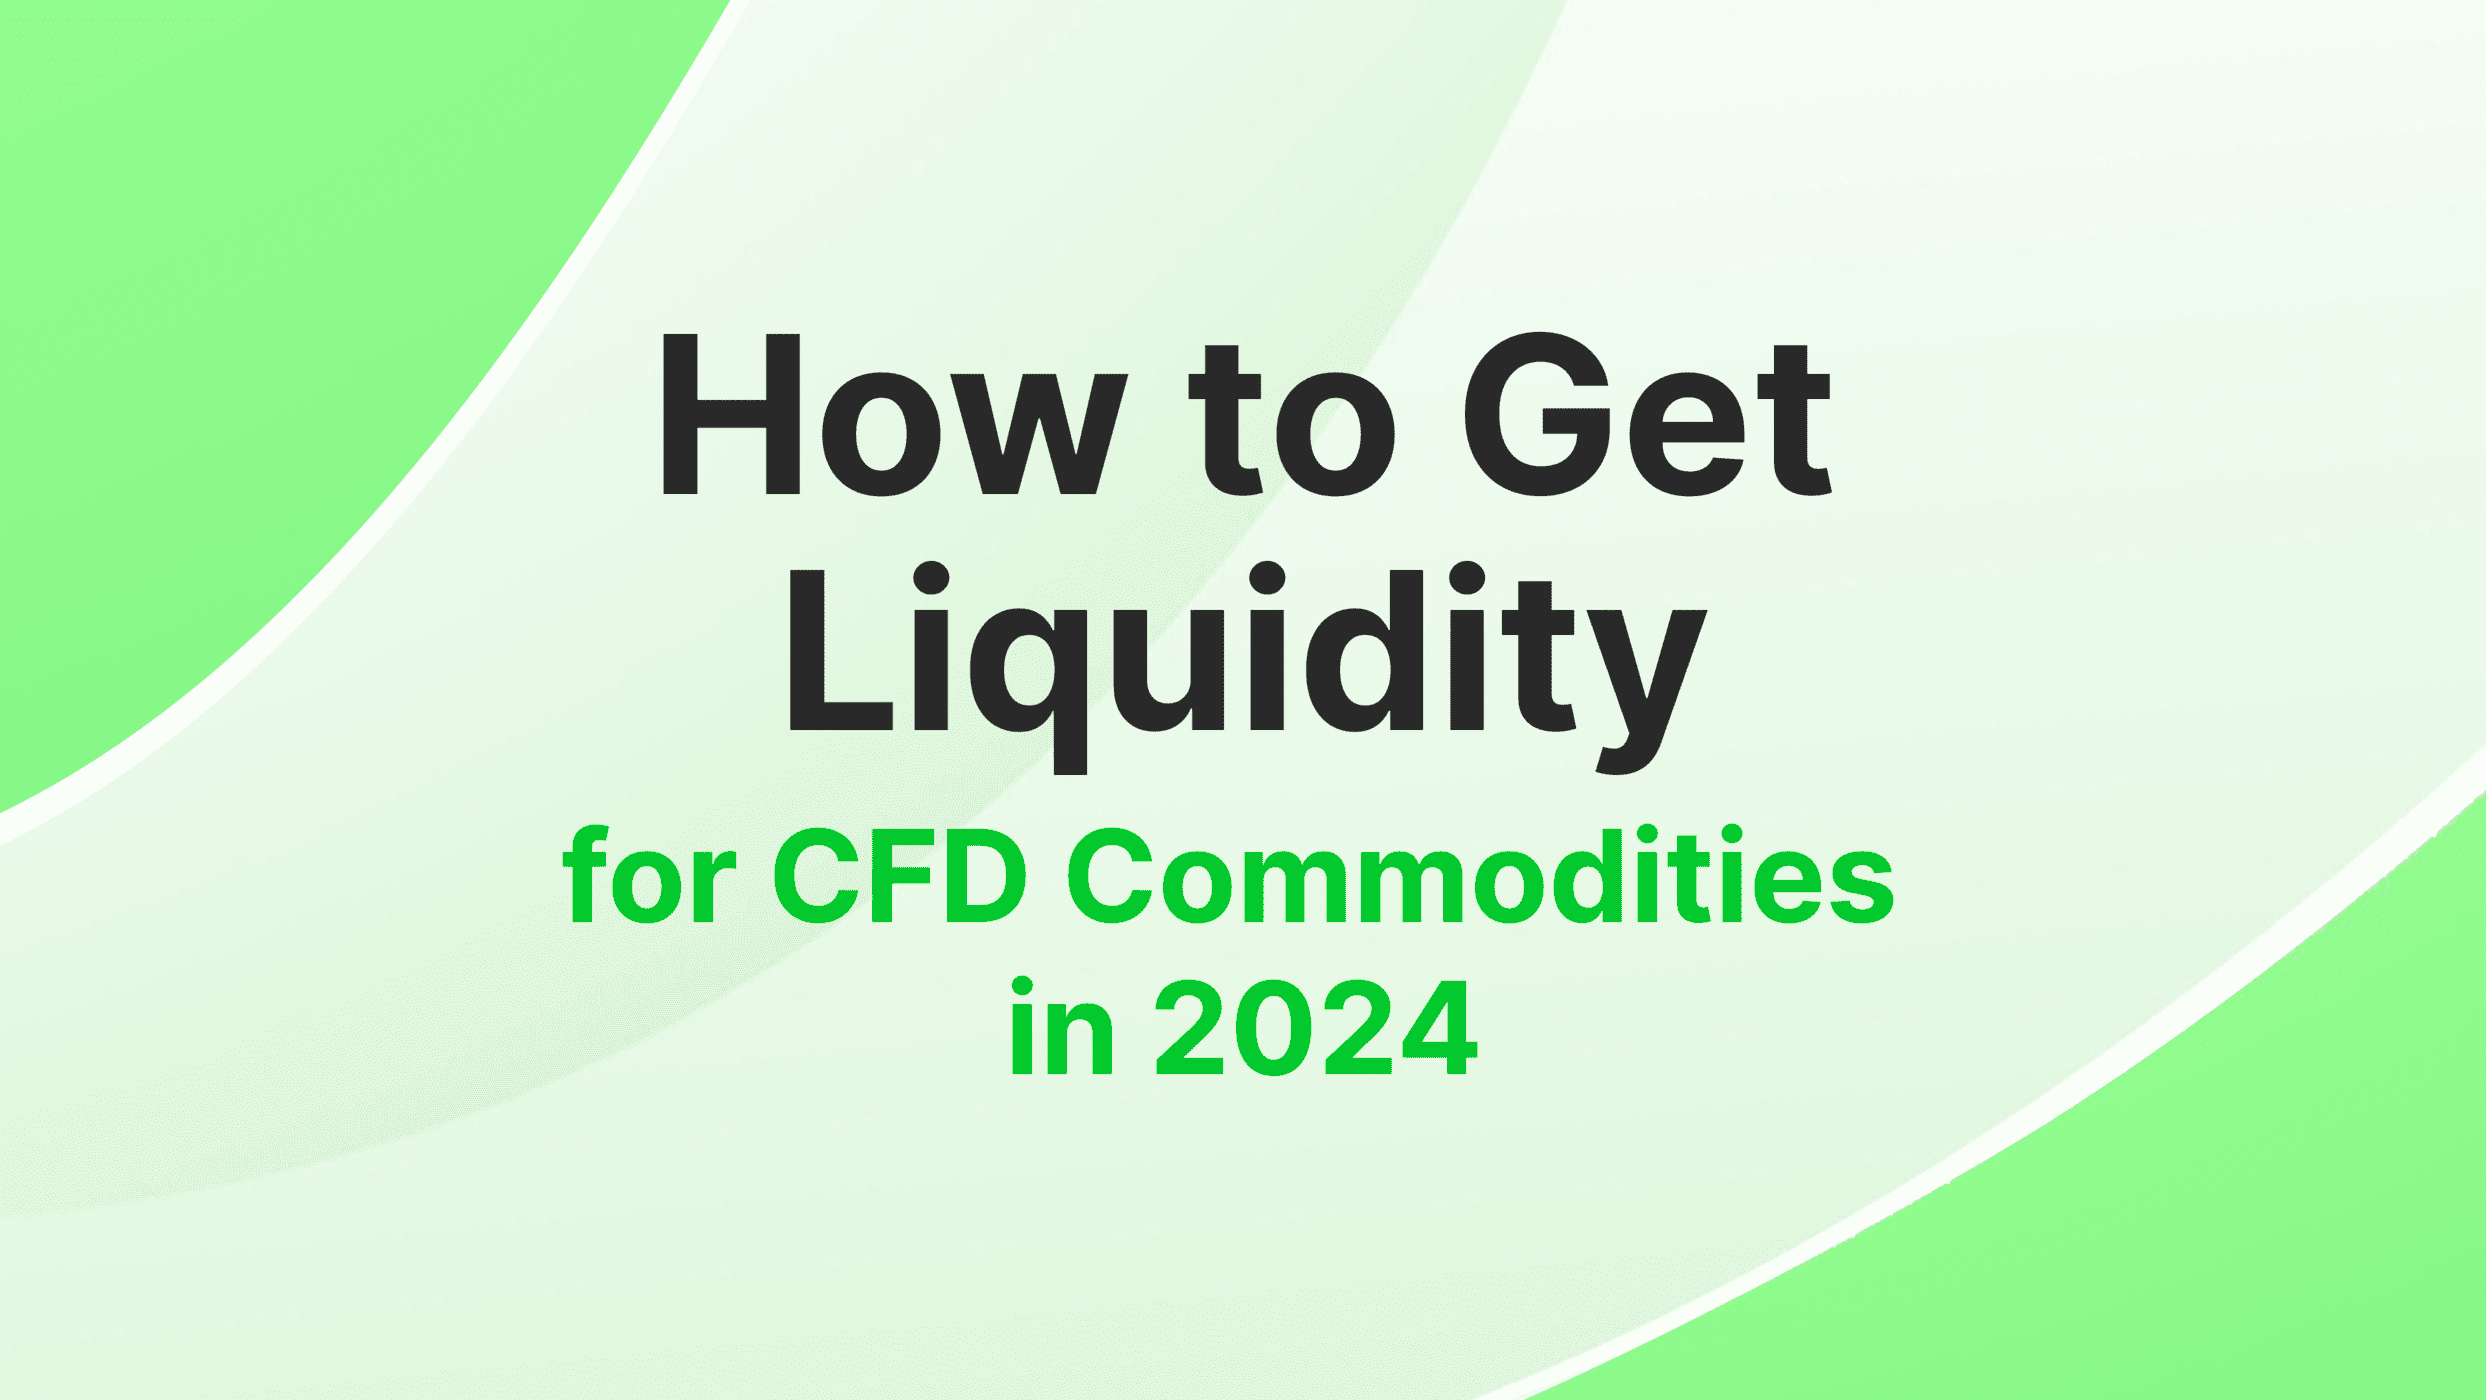 How to Secure Liquidity for CFD Commodities in 2024